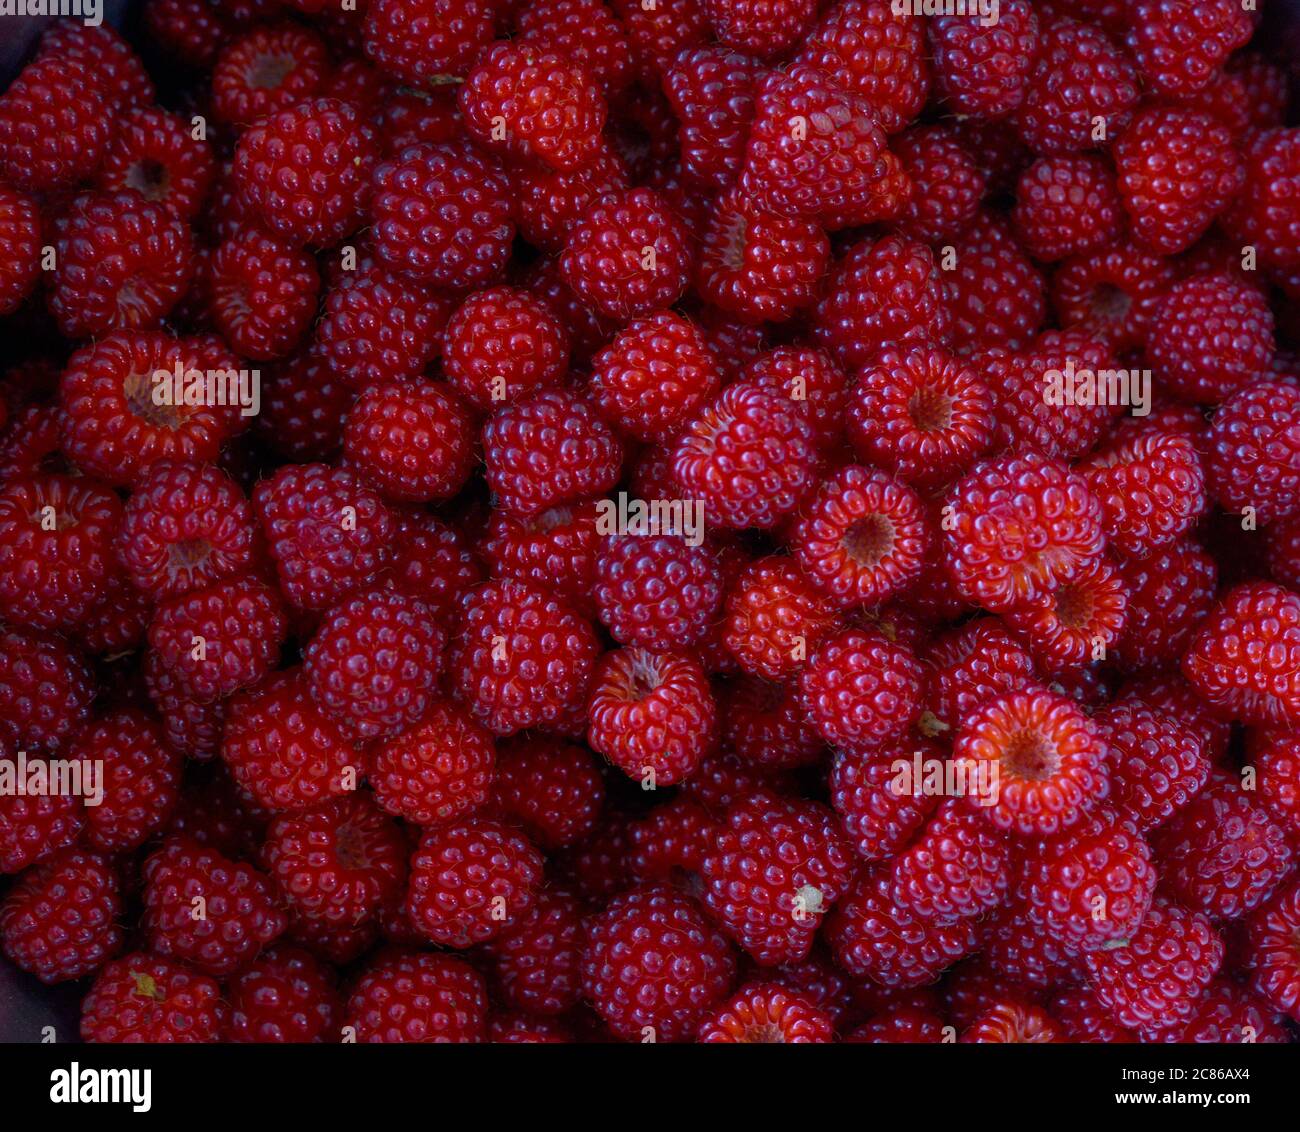 Summer raspberries harvested in south dartmouth Ma USA photo by bill belknap Stock Photo